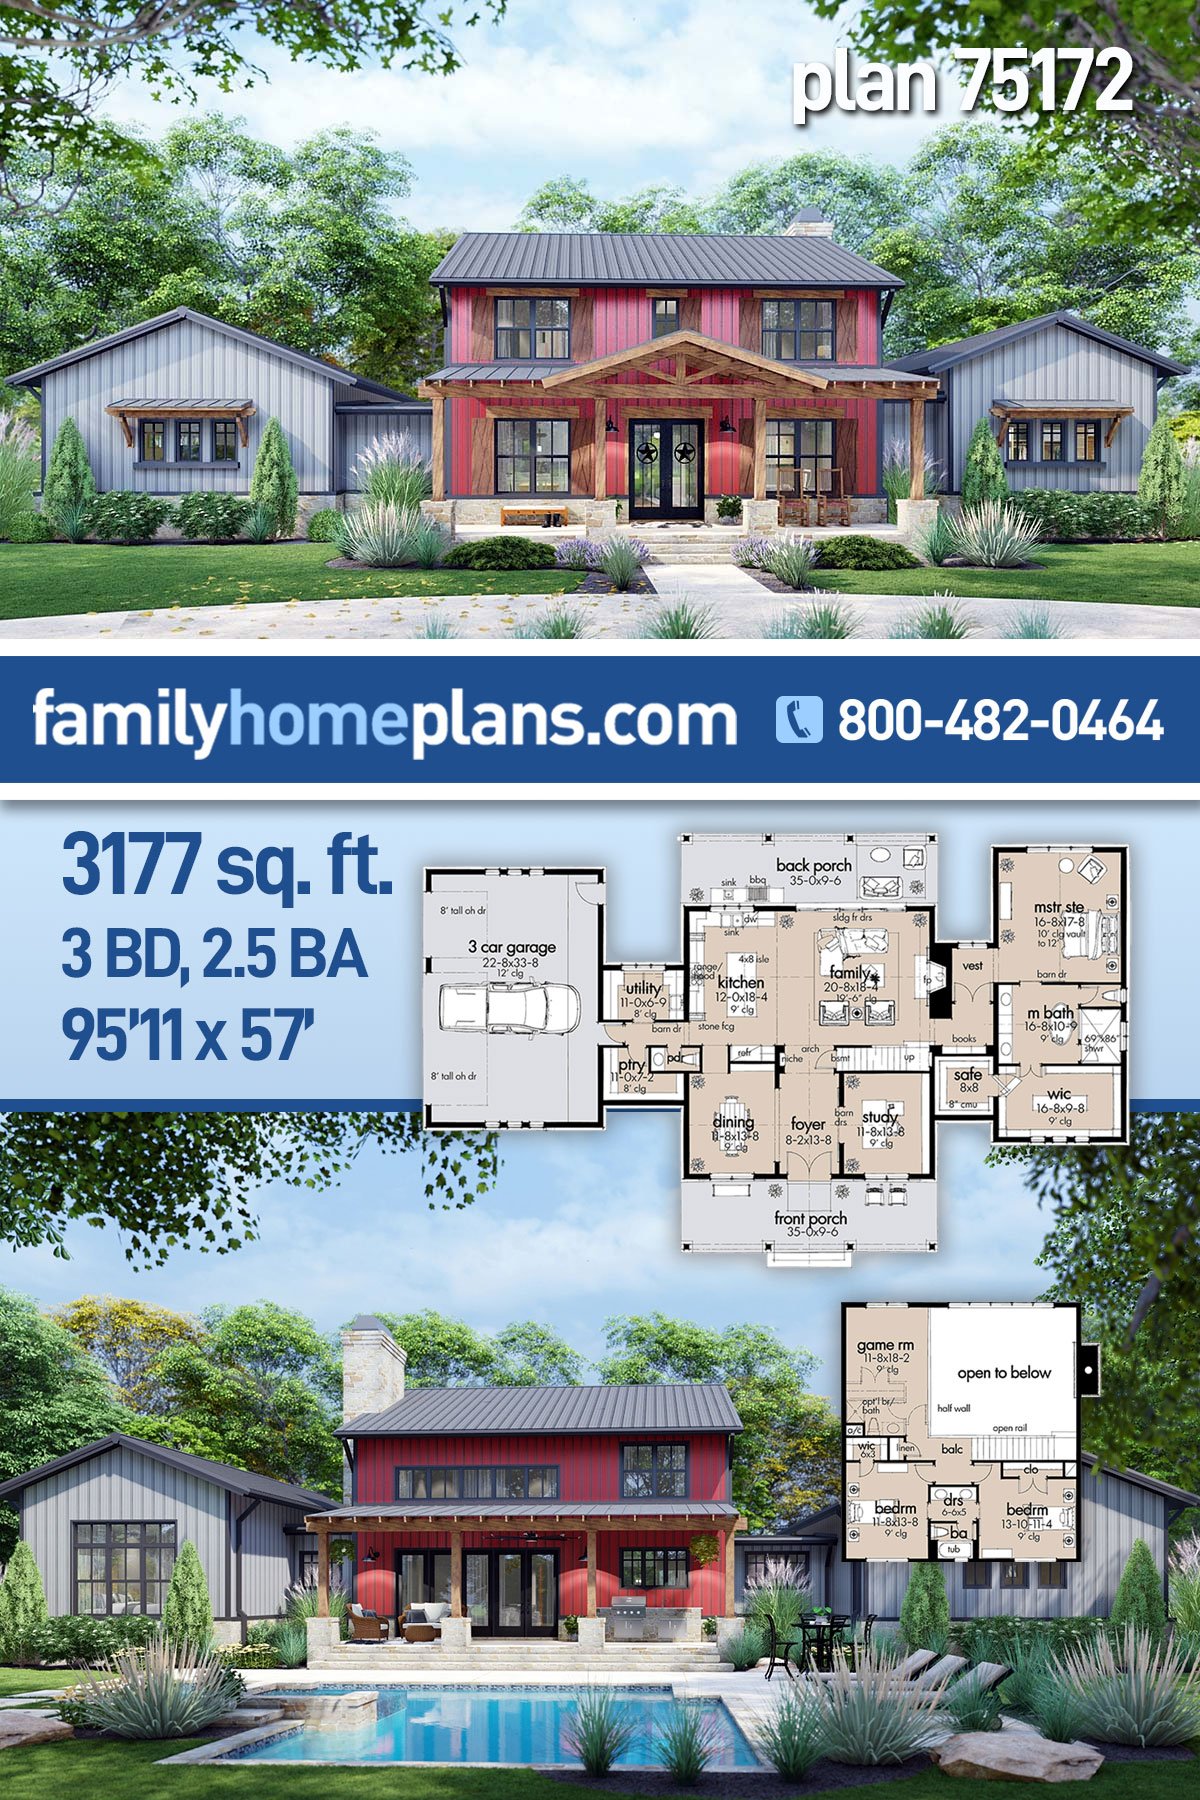 Country, Farmhouse House Plan 75172 with 3 Beds, 3 Baths, 3 Car Garage